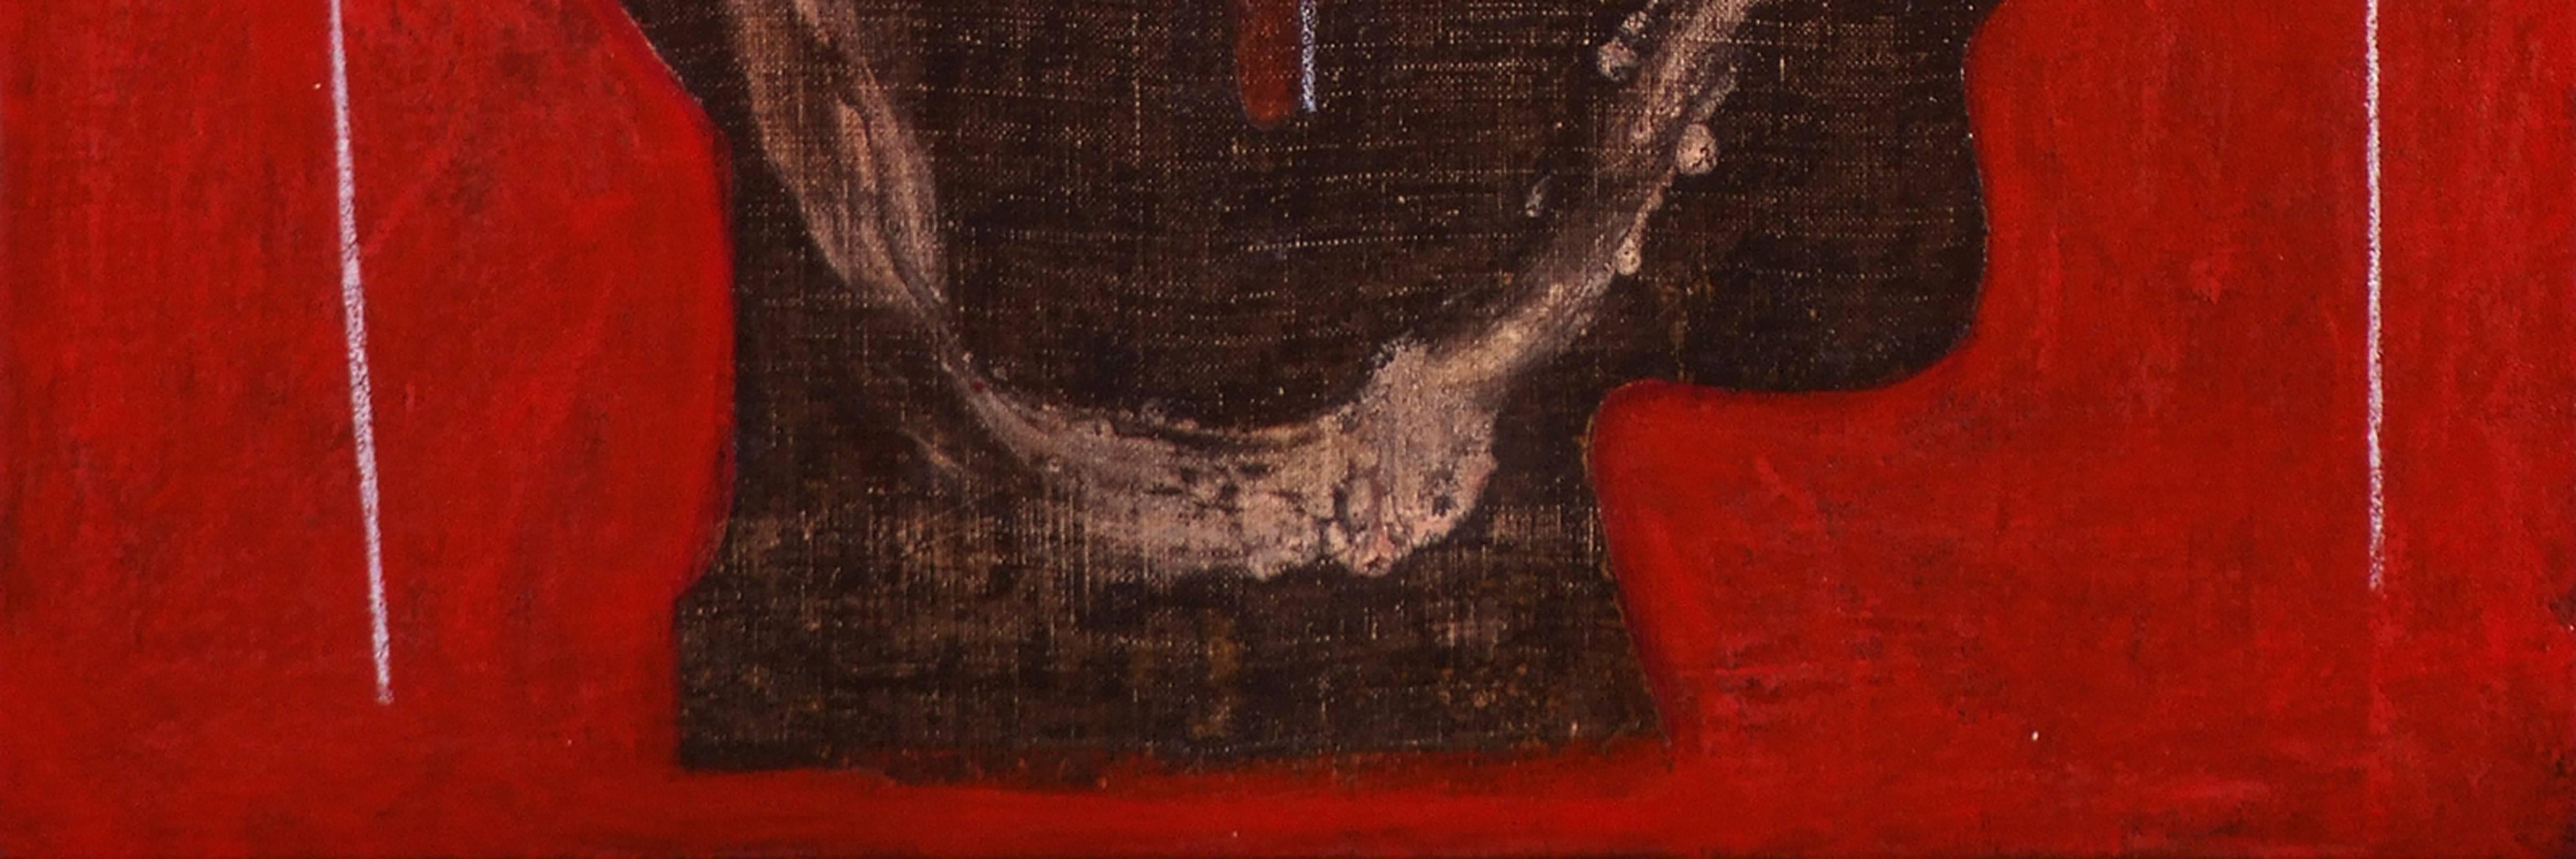 Etrusco 5 - Red Figurative Painting by Mimmo Paladino